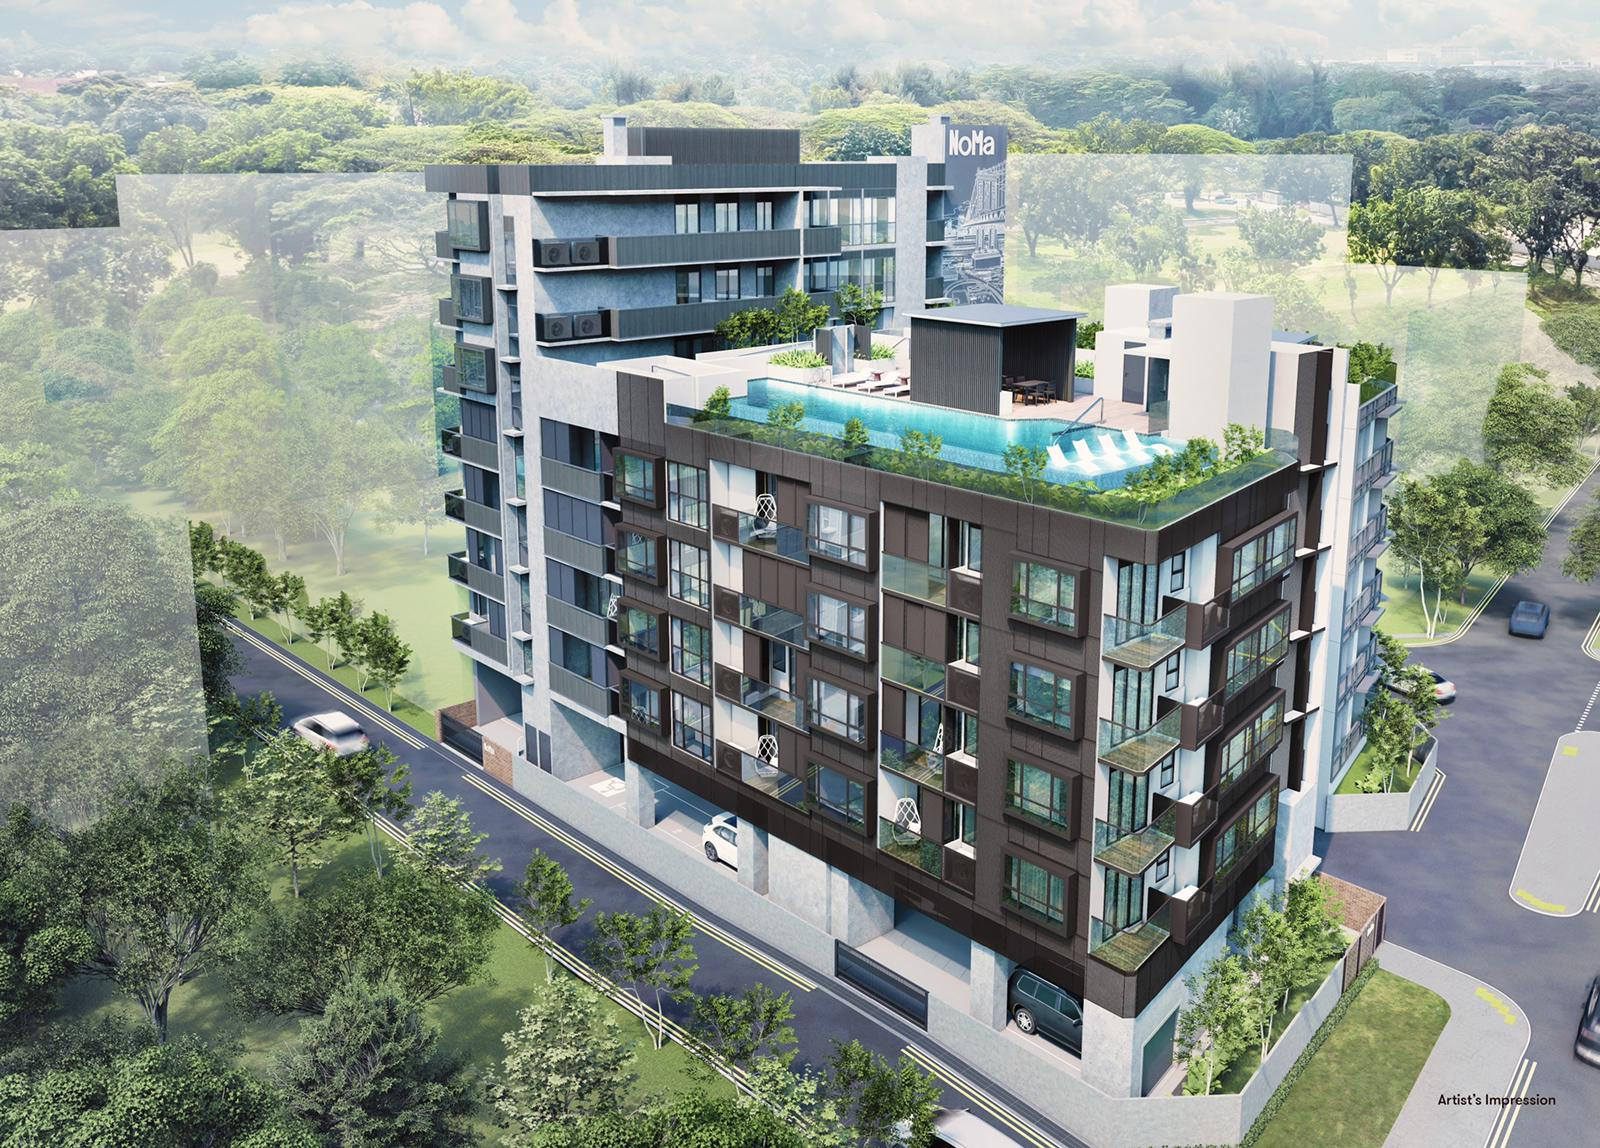 NoMa Condo nearby Gems Ville Condo: A special project developed by Macly Group